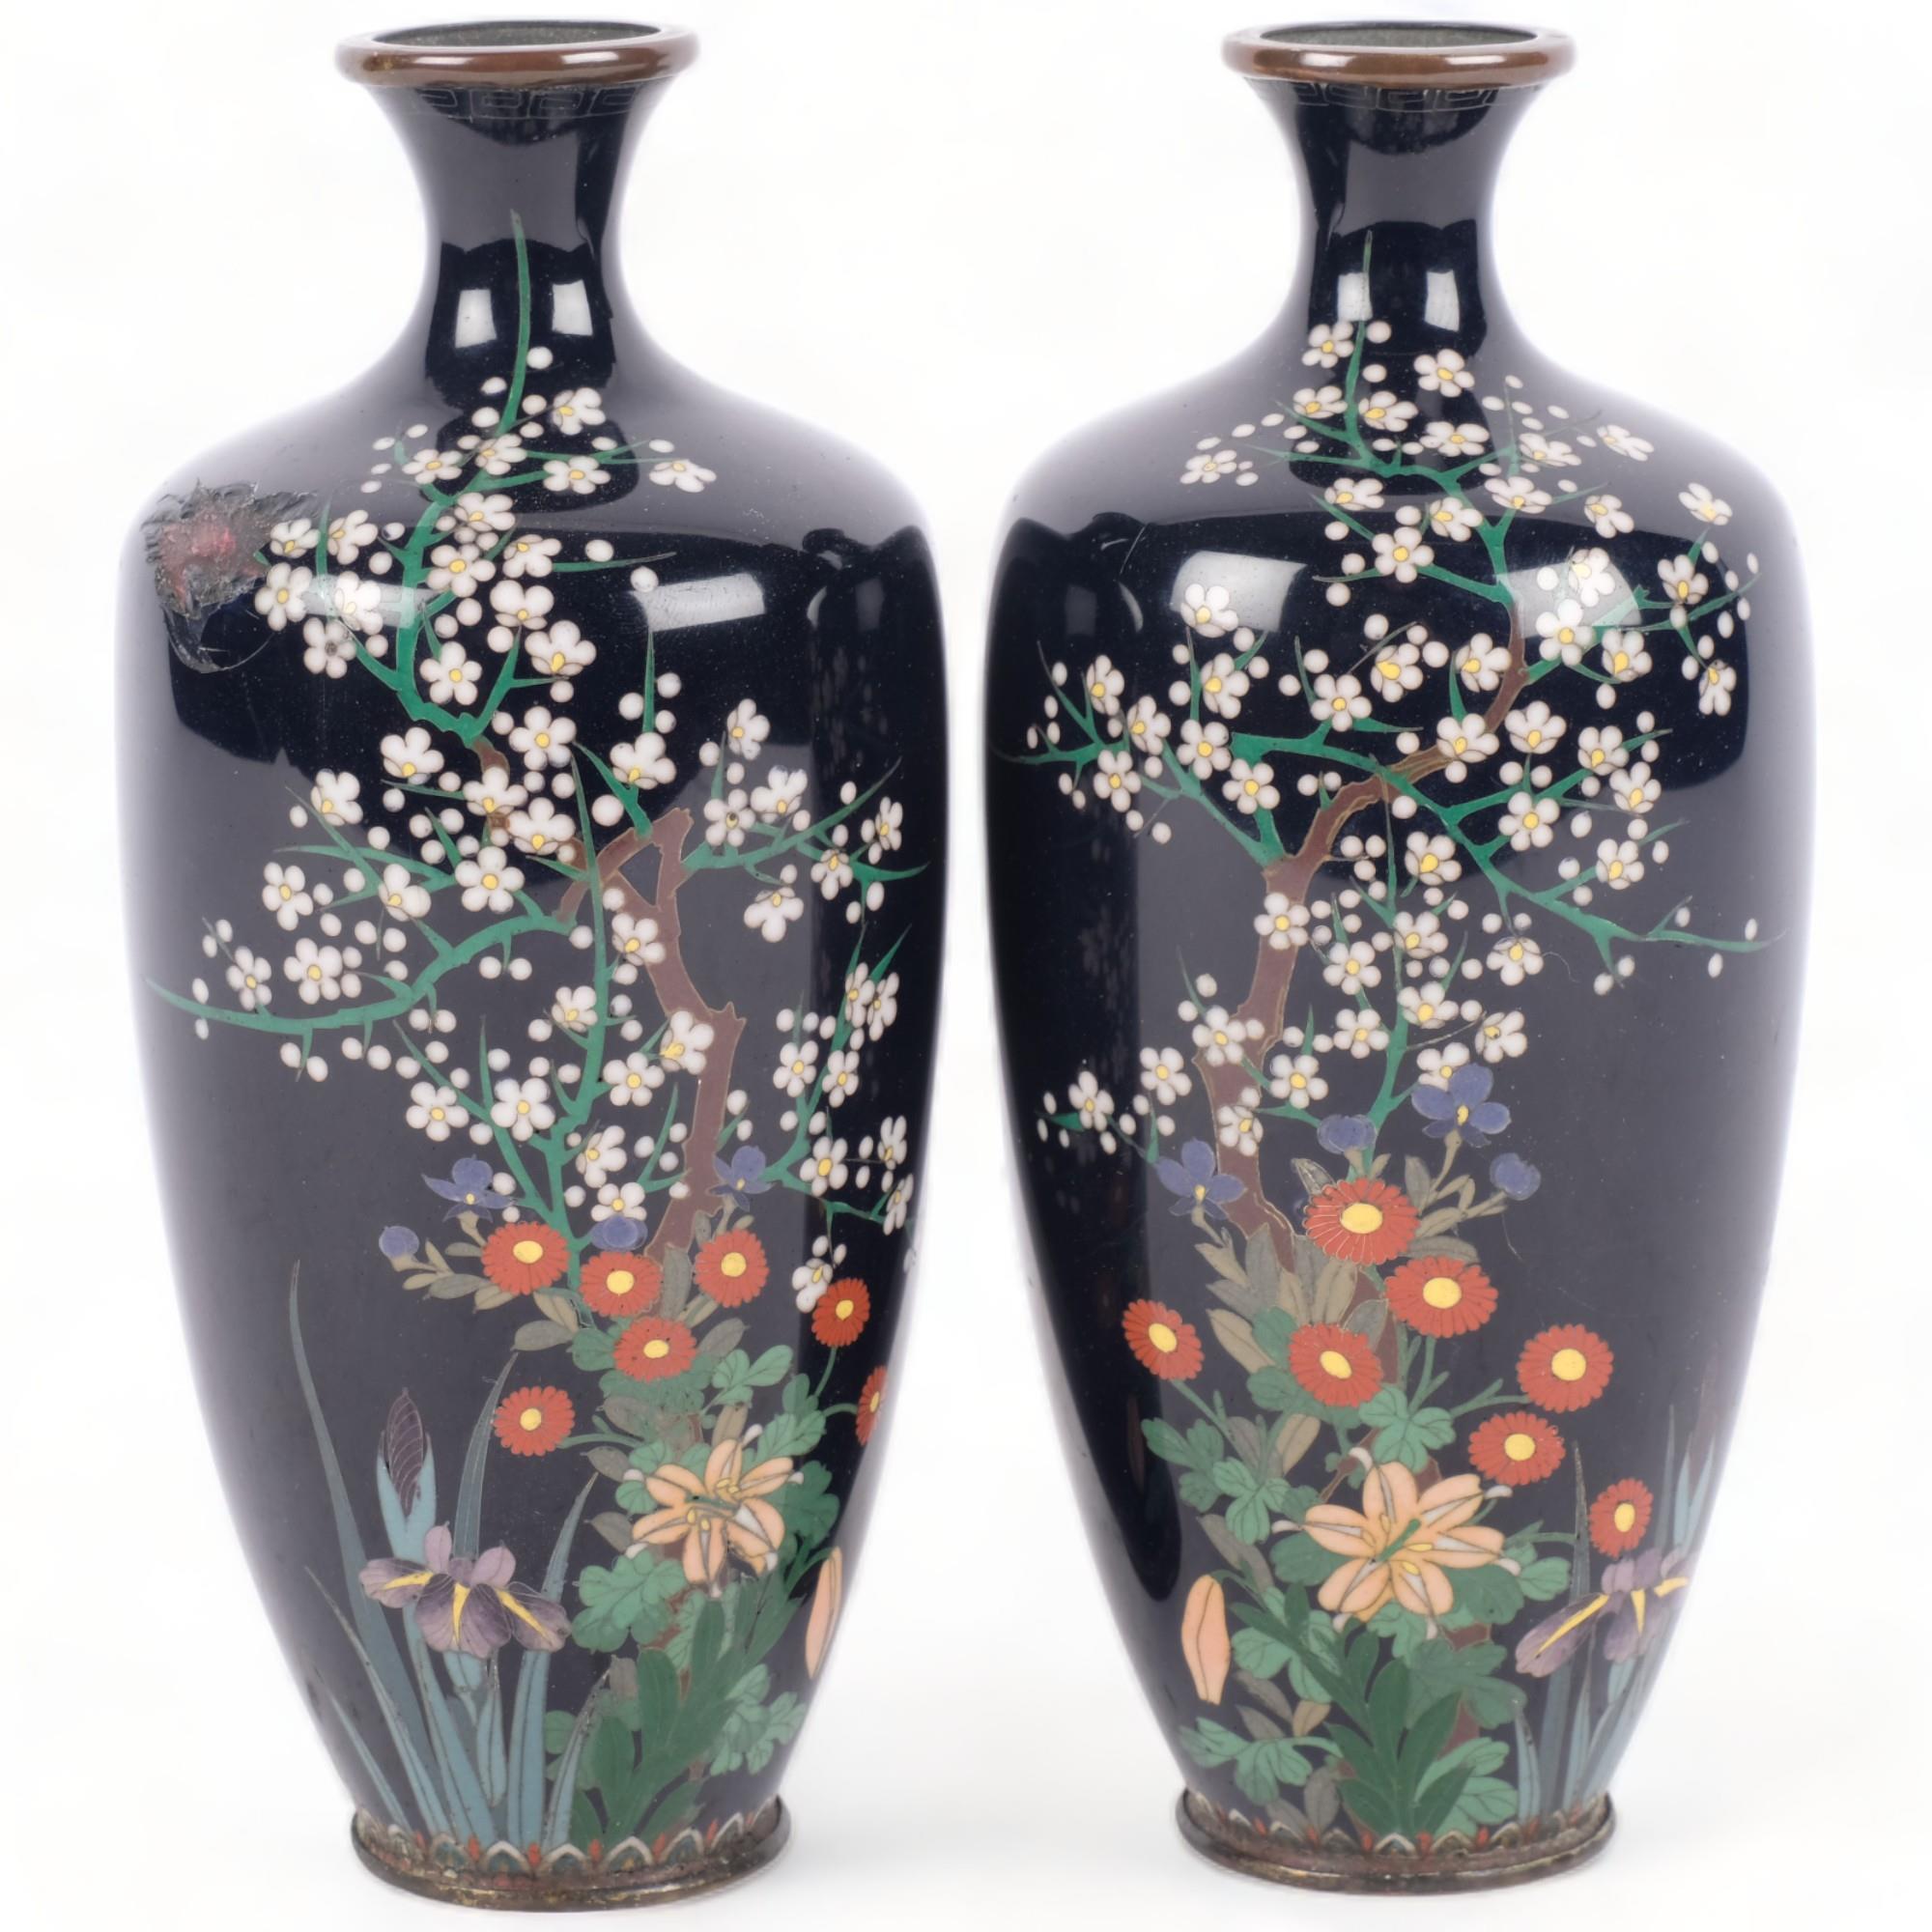 A pair of blue ground Antique cloisonne vases, with blossom and floral decoration (some damage),